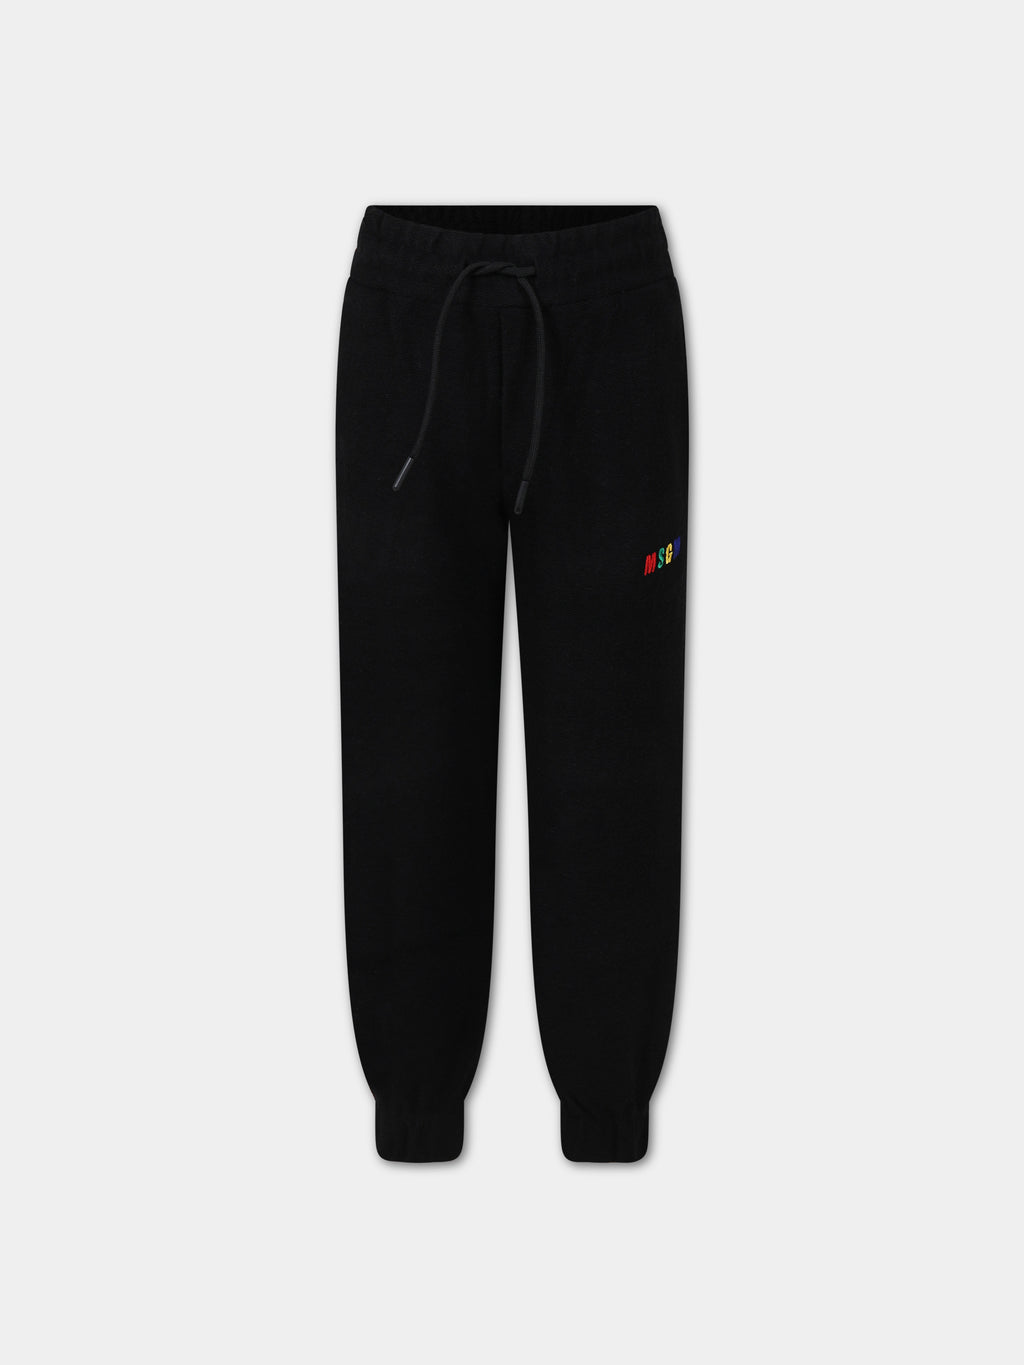 Black trousers fro kids with logo